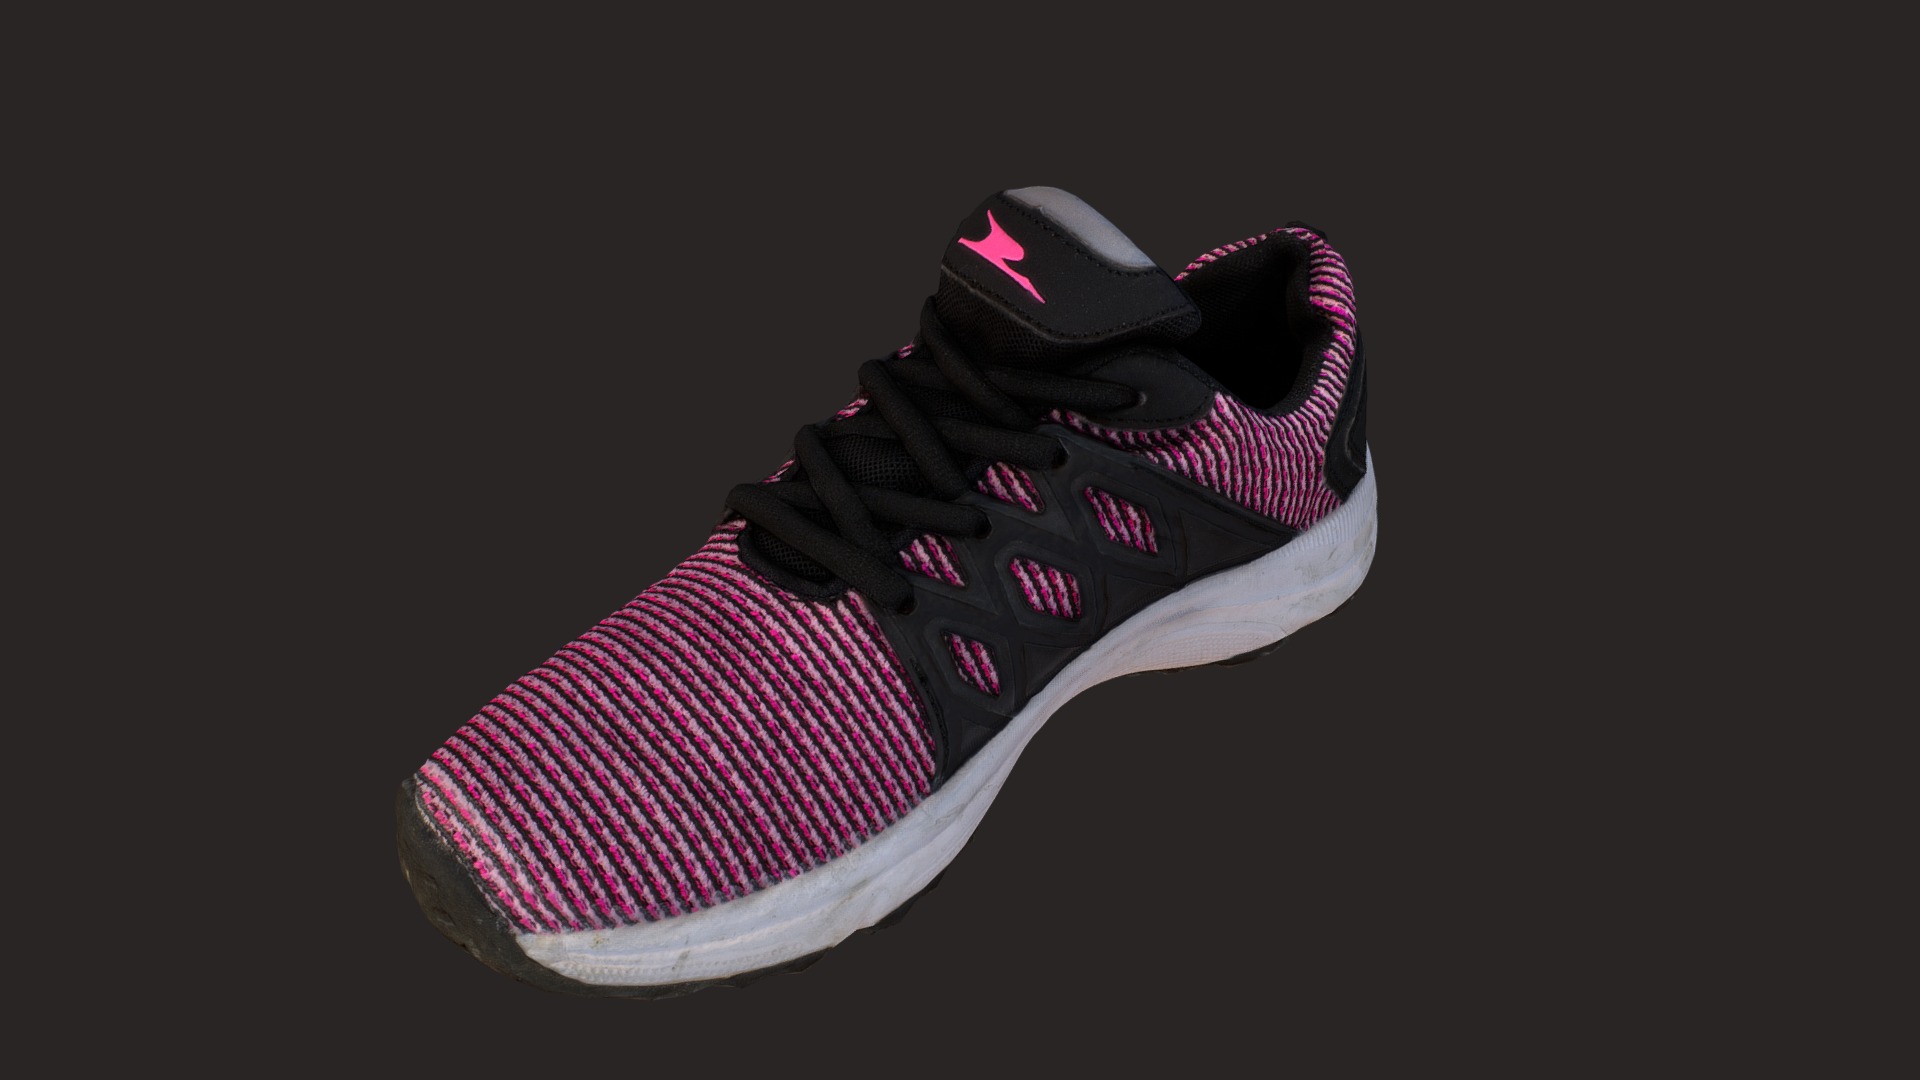 3D model Sneaker lowpoly - This is a 3D model of the Sneaker lowpoly. The 3D model is about a black and pink shoe.